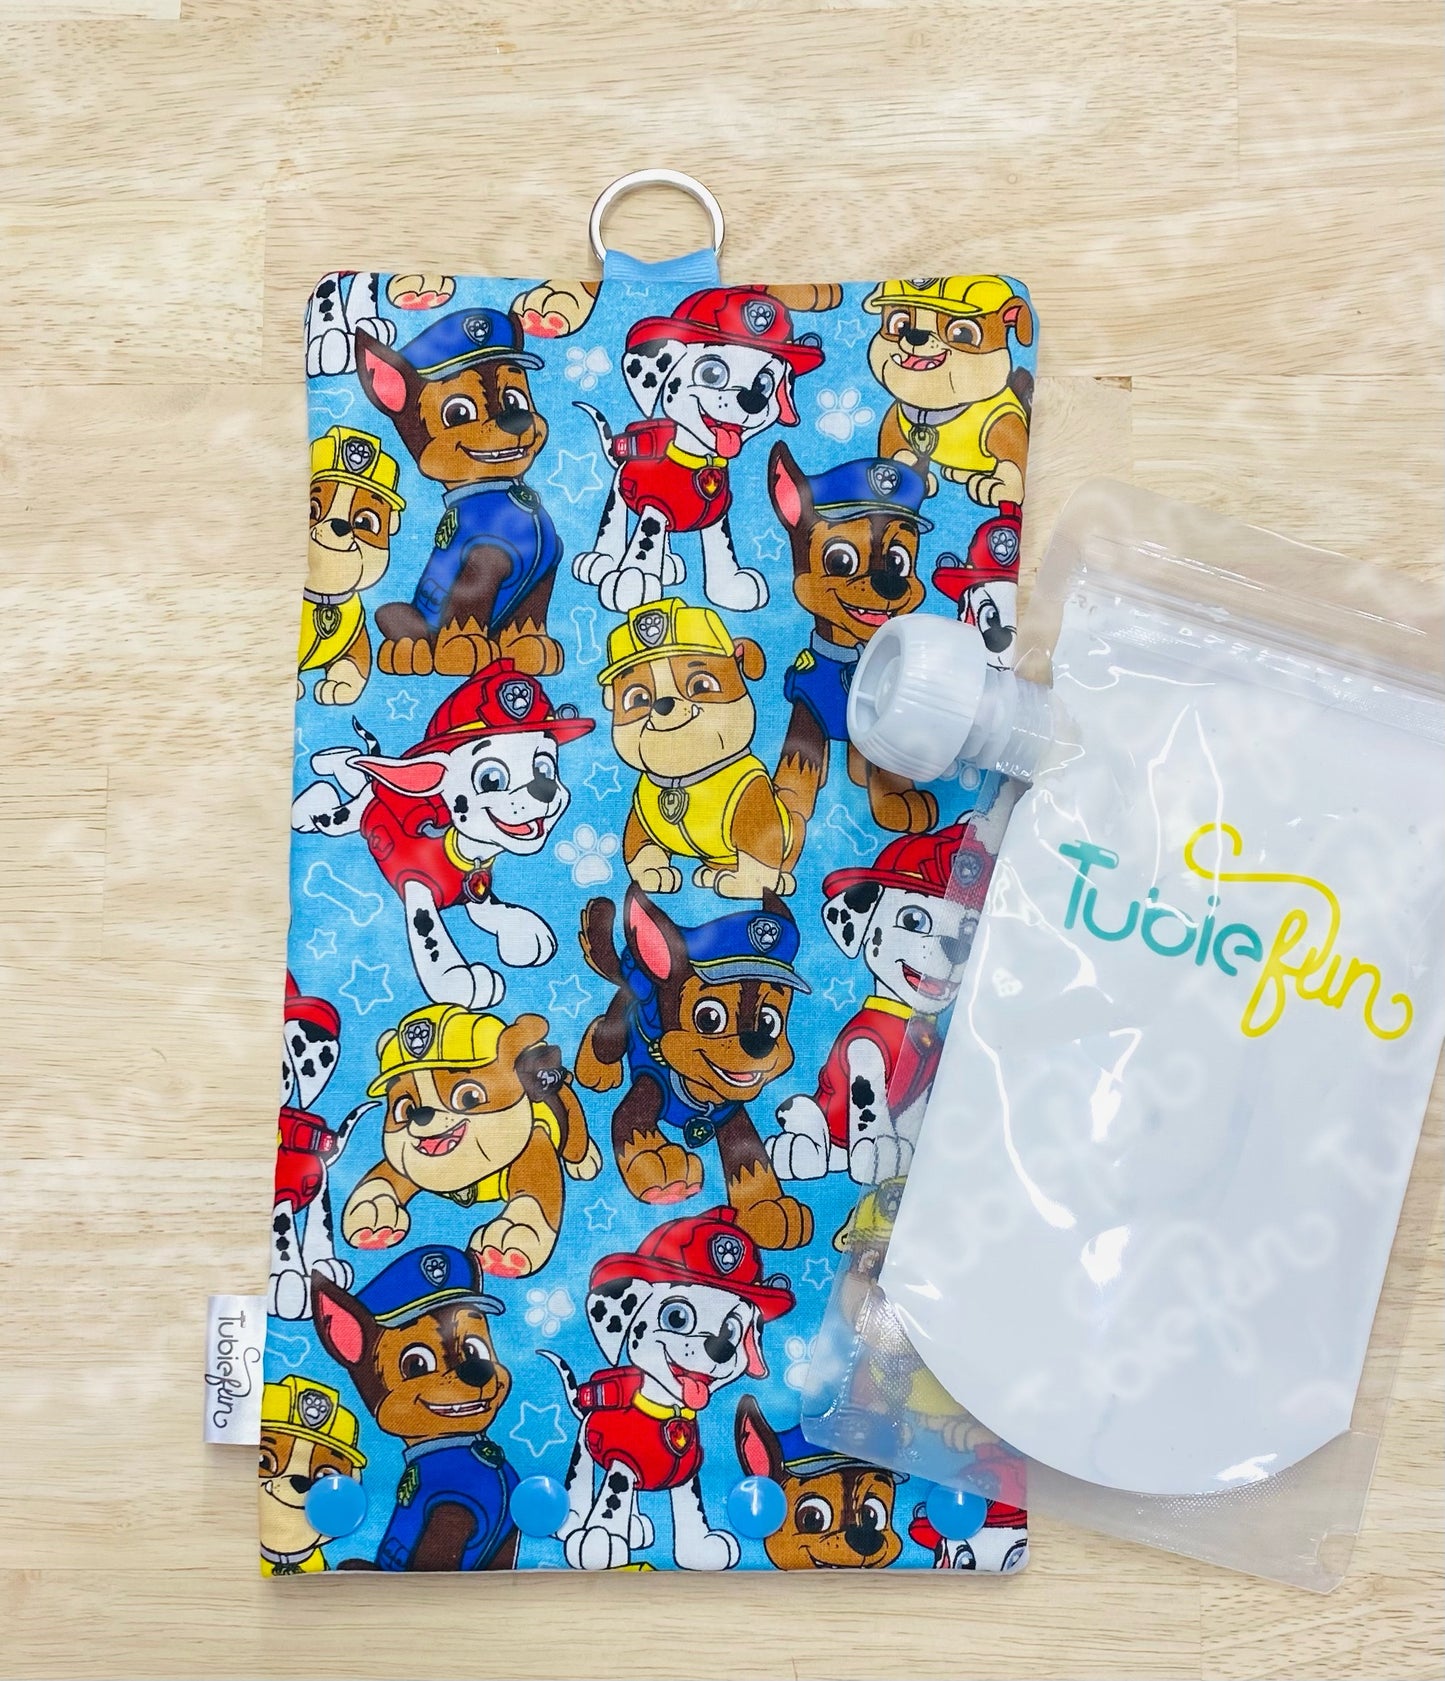 NEW Insulated Milk Bag Suitable for Tubie Fun 500ml Reusable Pouches - Pups